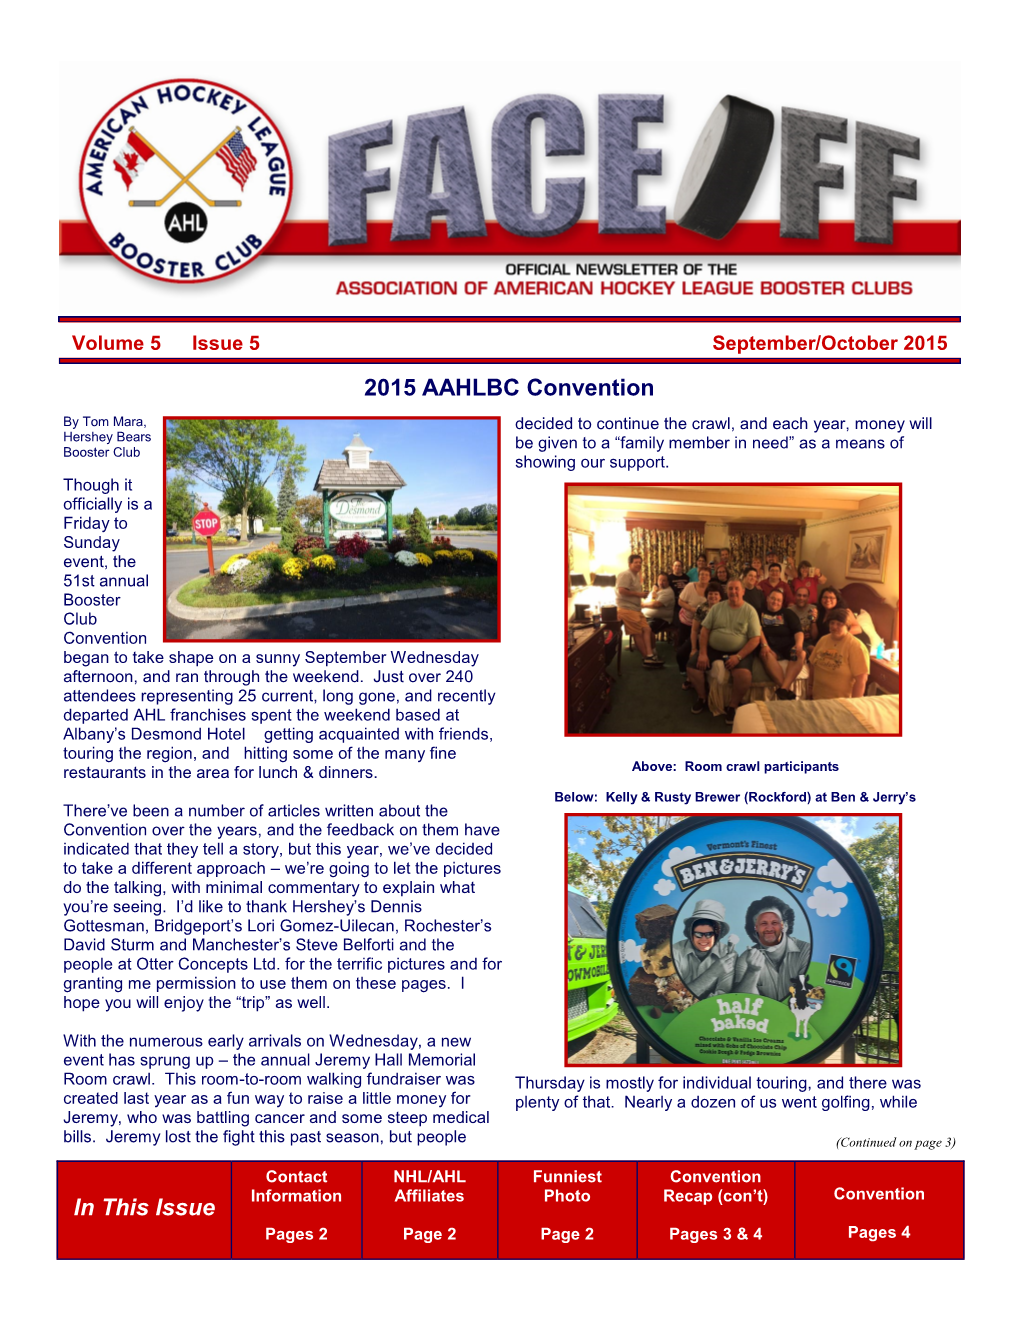 In This Issue 2015 AAHLBC Convention